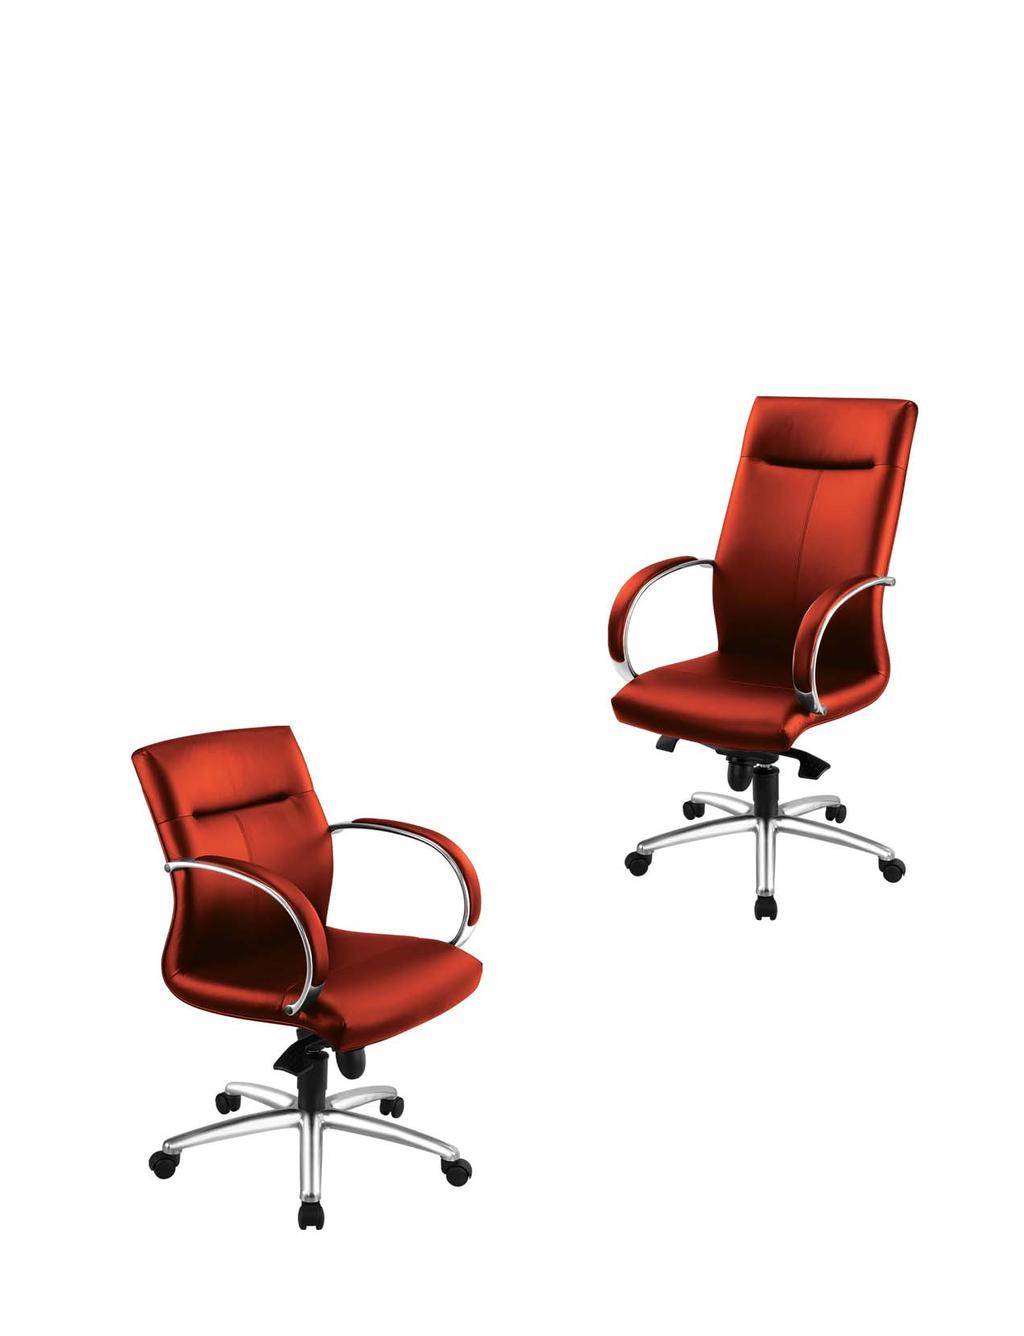 1 2 3 4 5 6 7 8 9 Slim Comfort A slim line executive chair range that provides exceptional comfort, craftsmanship and style for every office environment.